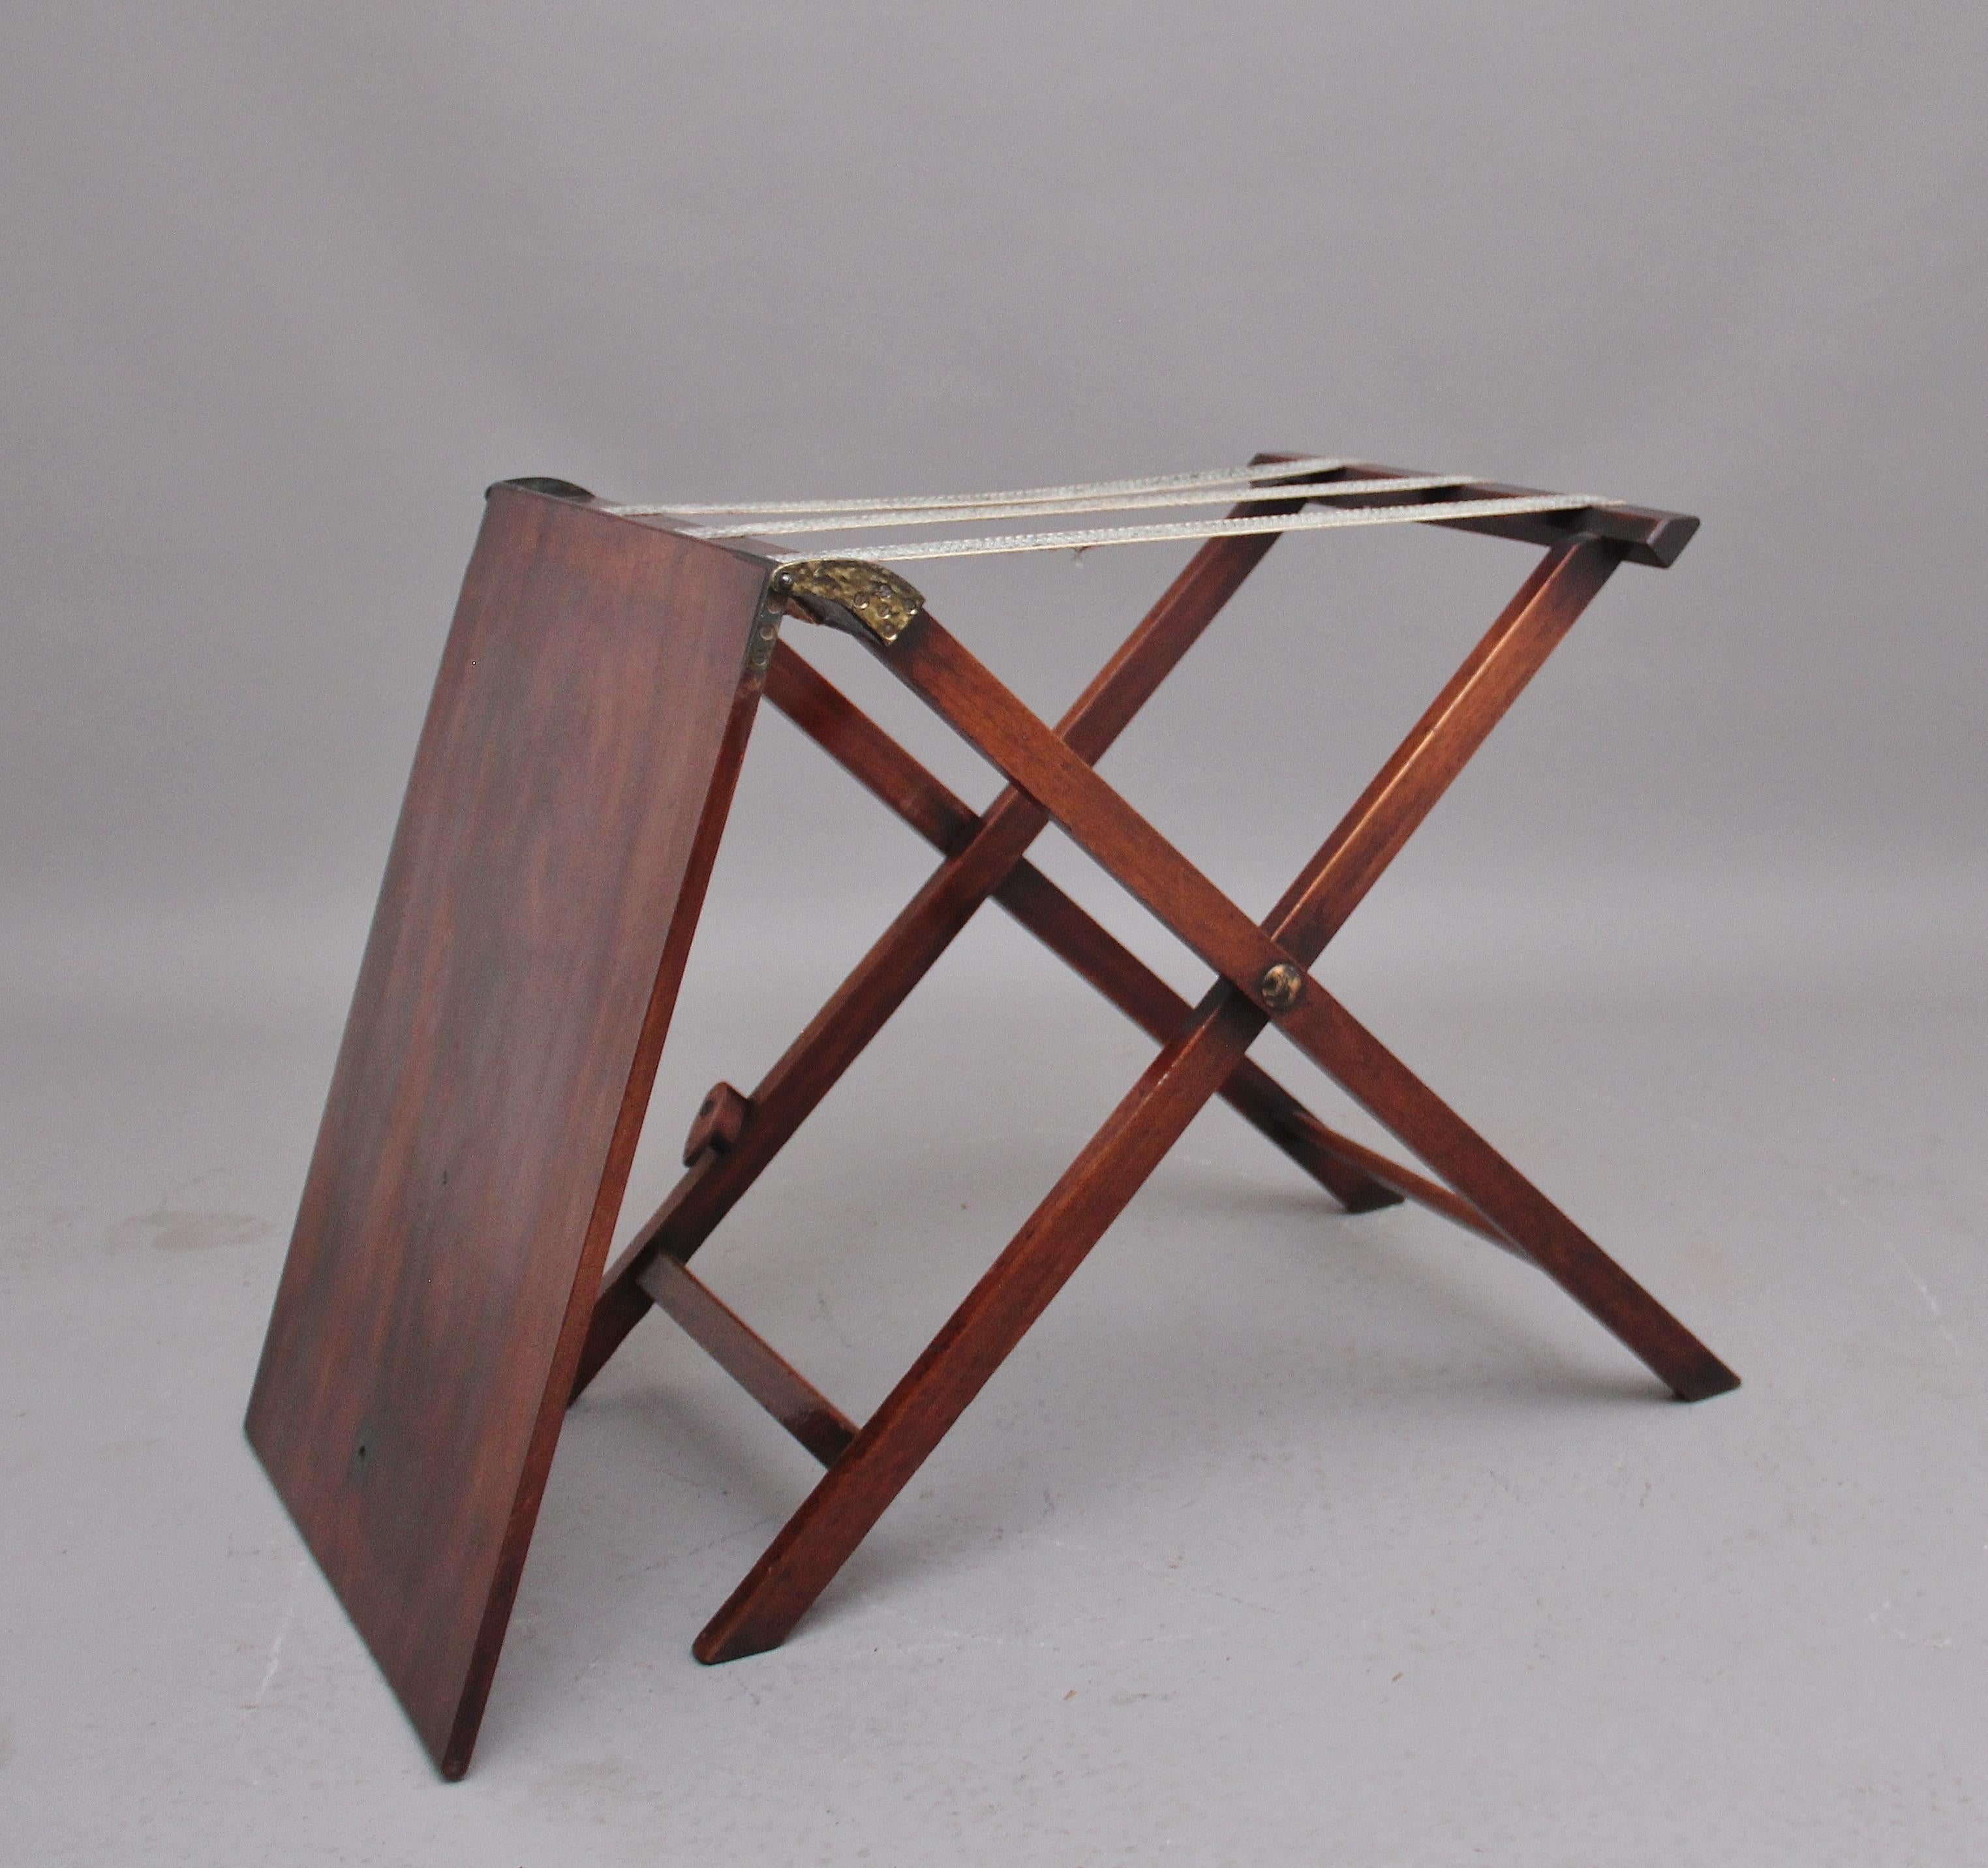 An unusual and rare early 19th century mahogany collapsible butlers tray on stand, hinged rectangular top on X frame stand collapsing flat with locking device. Circa 1810.